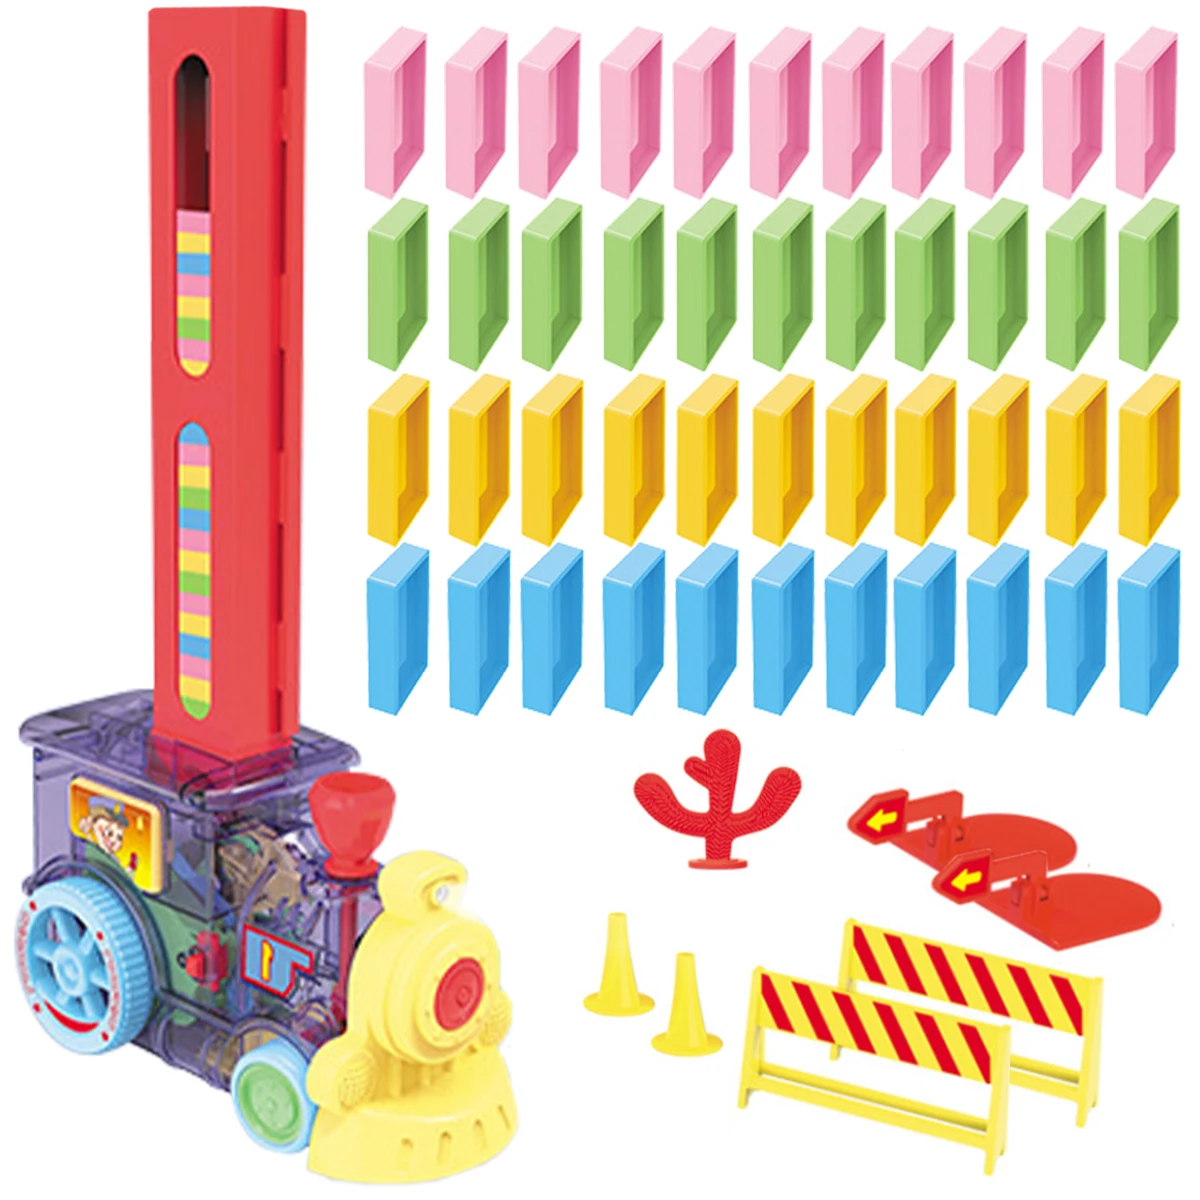 

Kids Domino Train Car Blocks 60pcs Colorful Domino Building Stacking Toy Automatic Laying Brick Game Educational DIY Toy Gifts